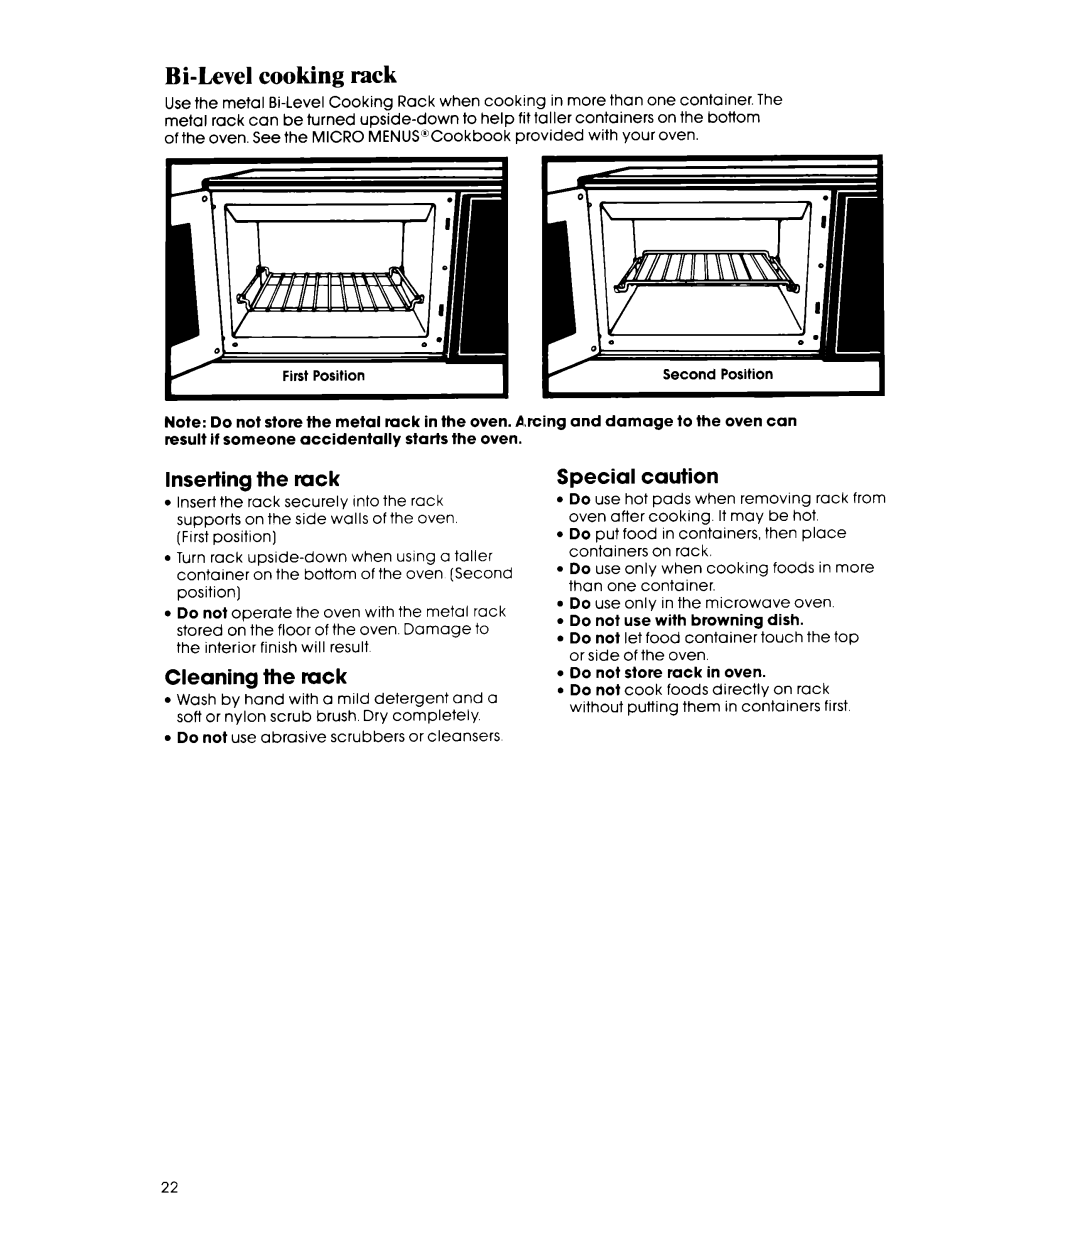 Whirlpool MW8700XR manual Bi-Levelcooking rack, Inserting the rack, Cleaning the tuck, Special caution 